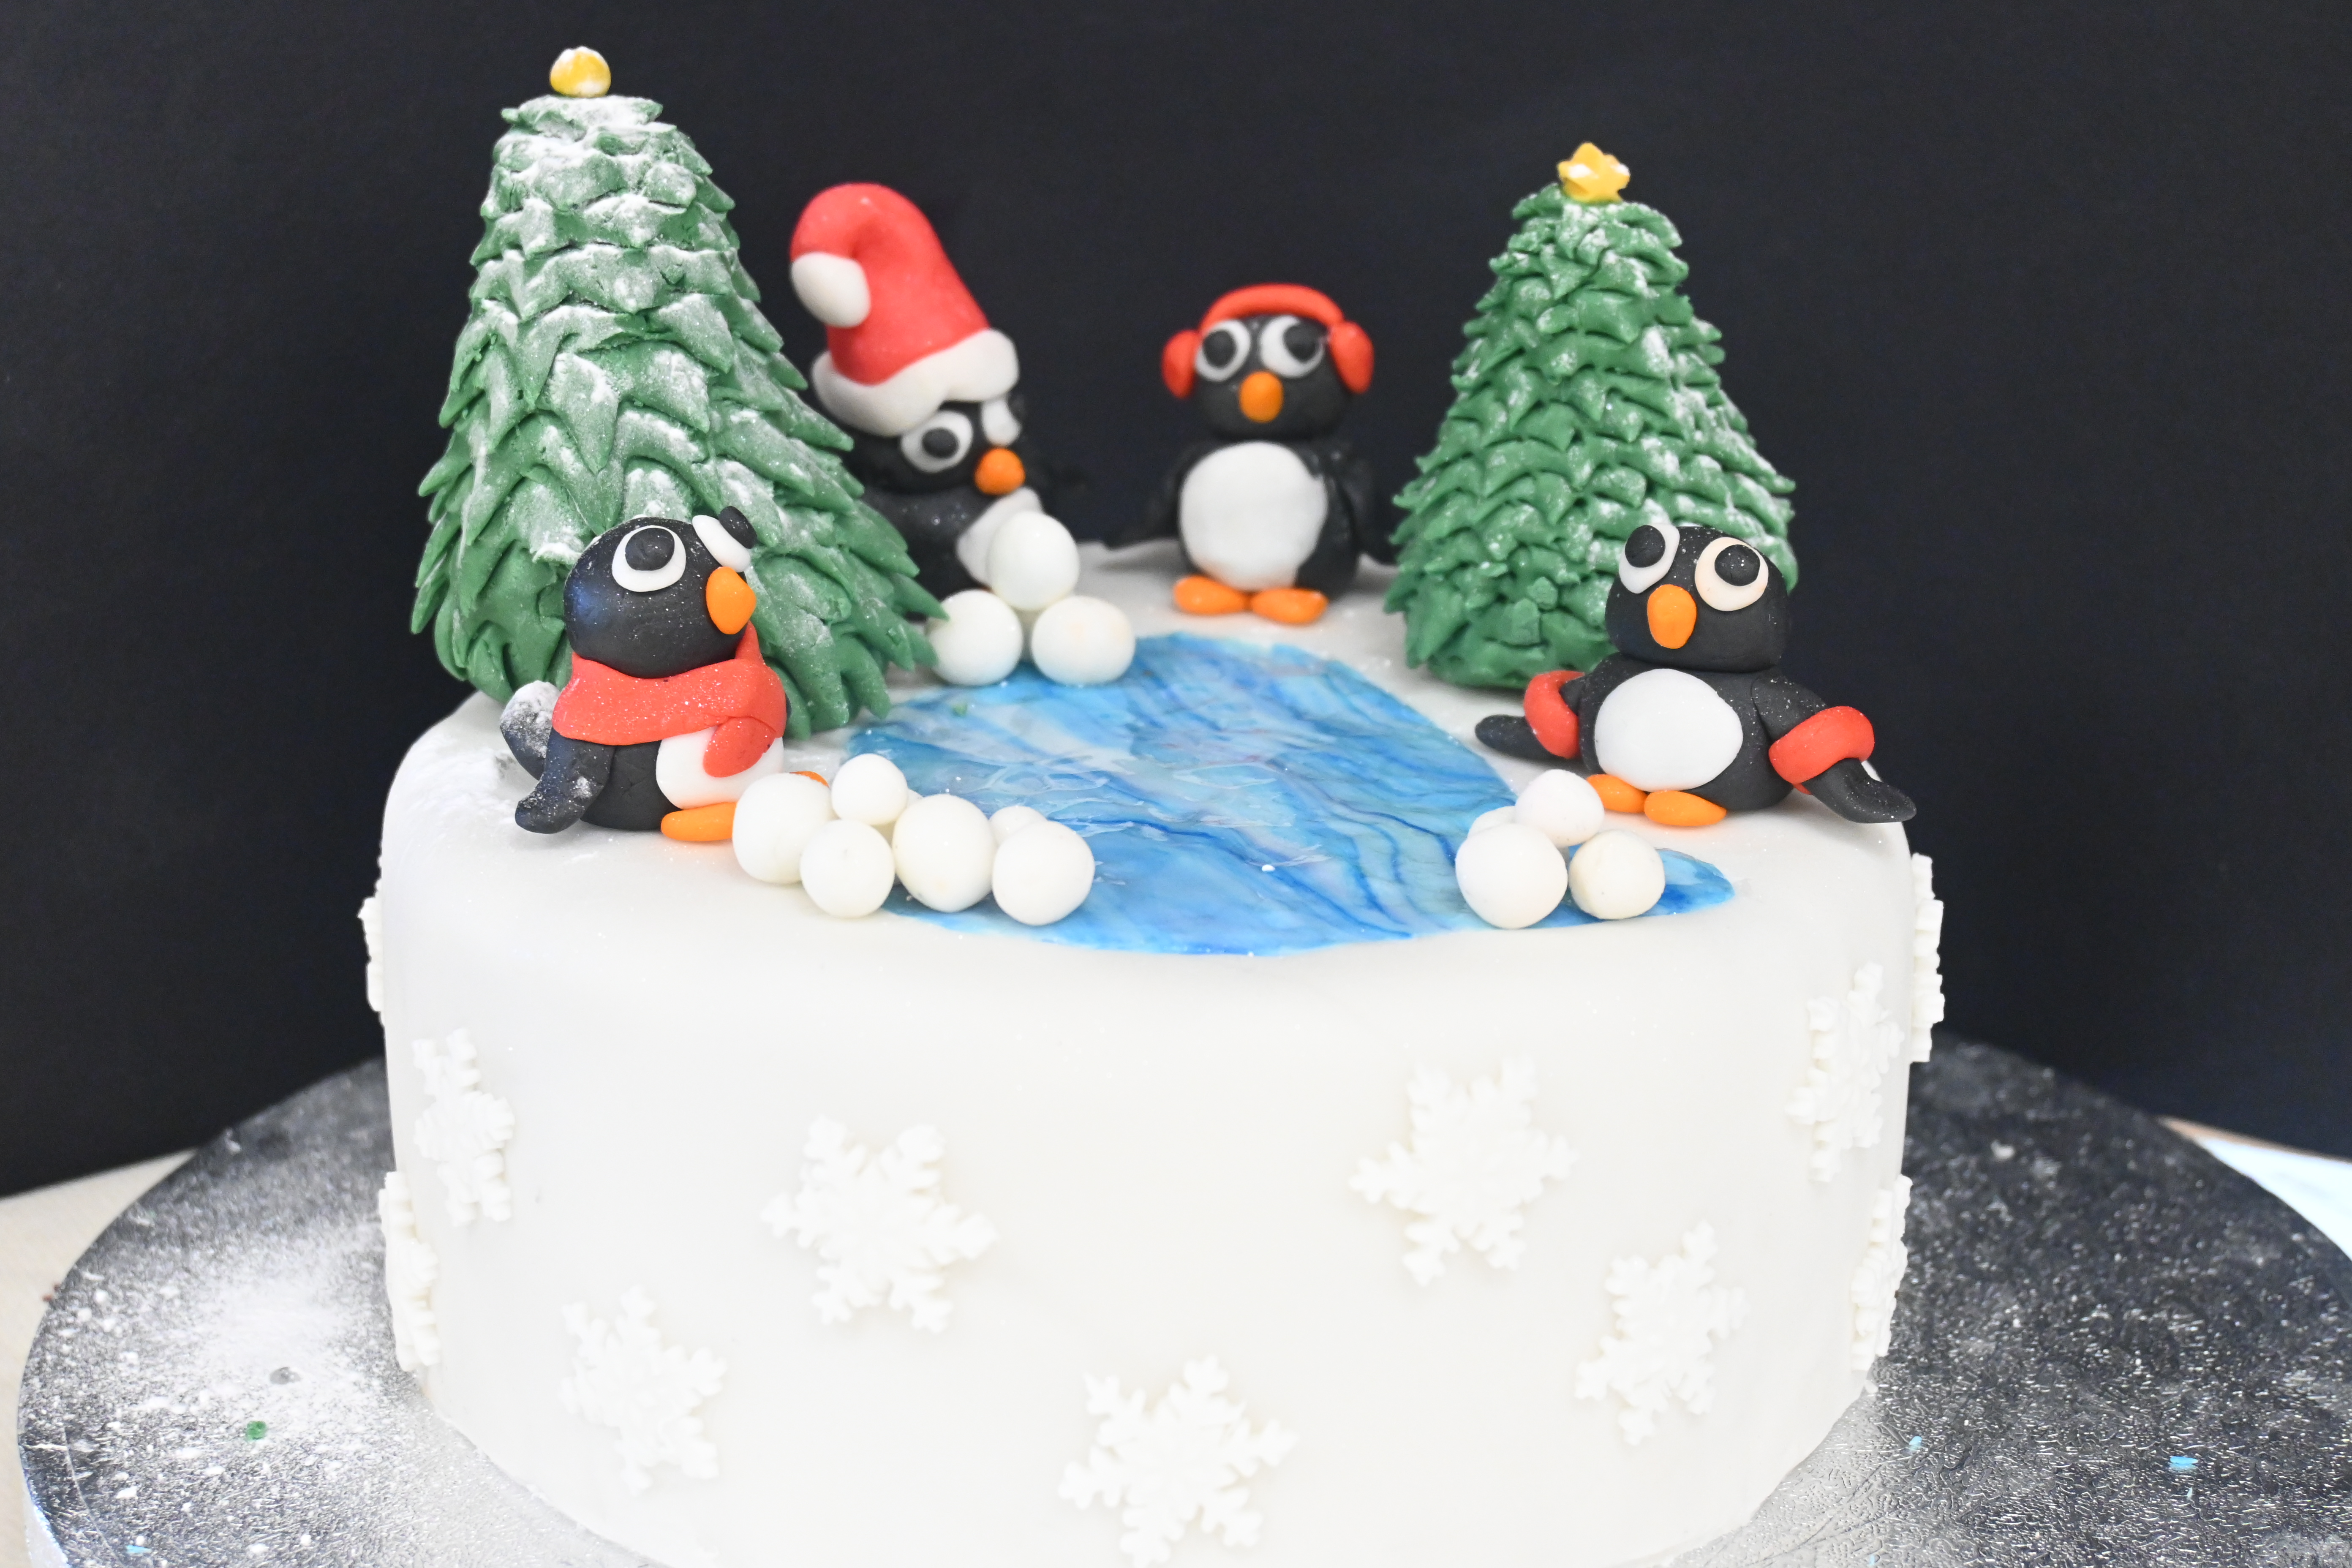 Cake topped with penguins, trees and snowballs